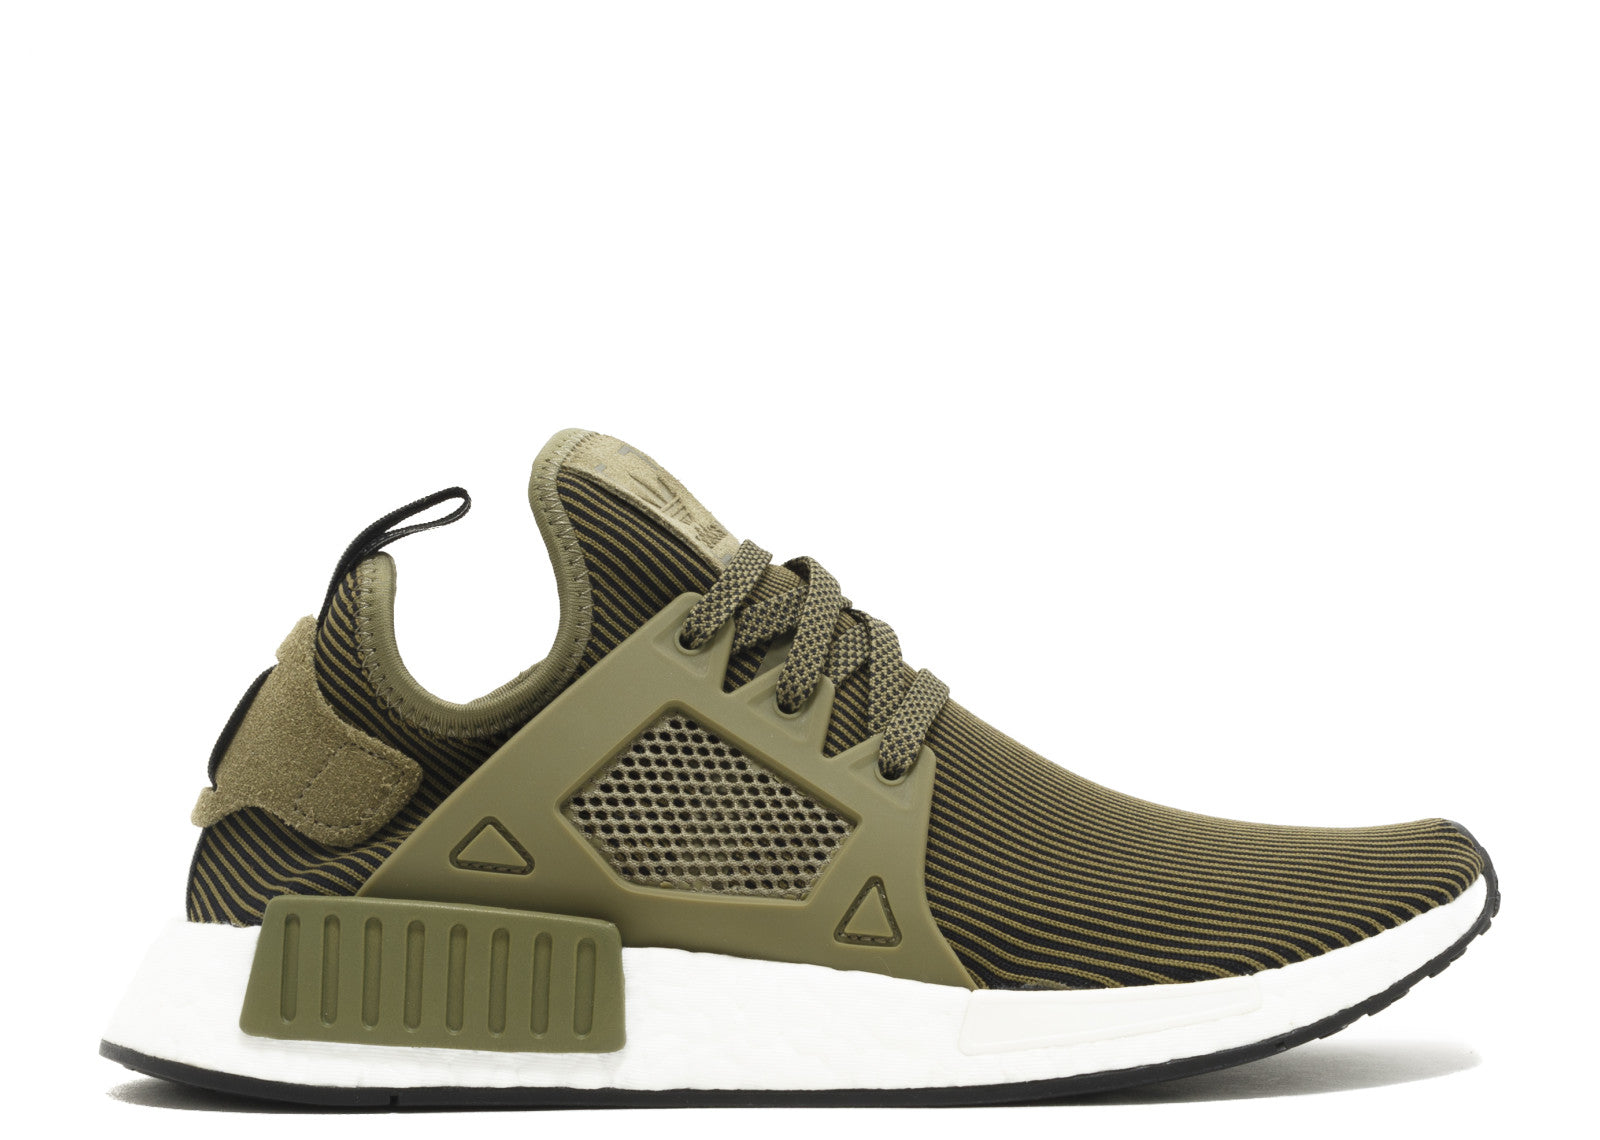 NMD XR1 PK 'Olive' – CREP